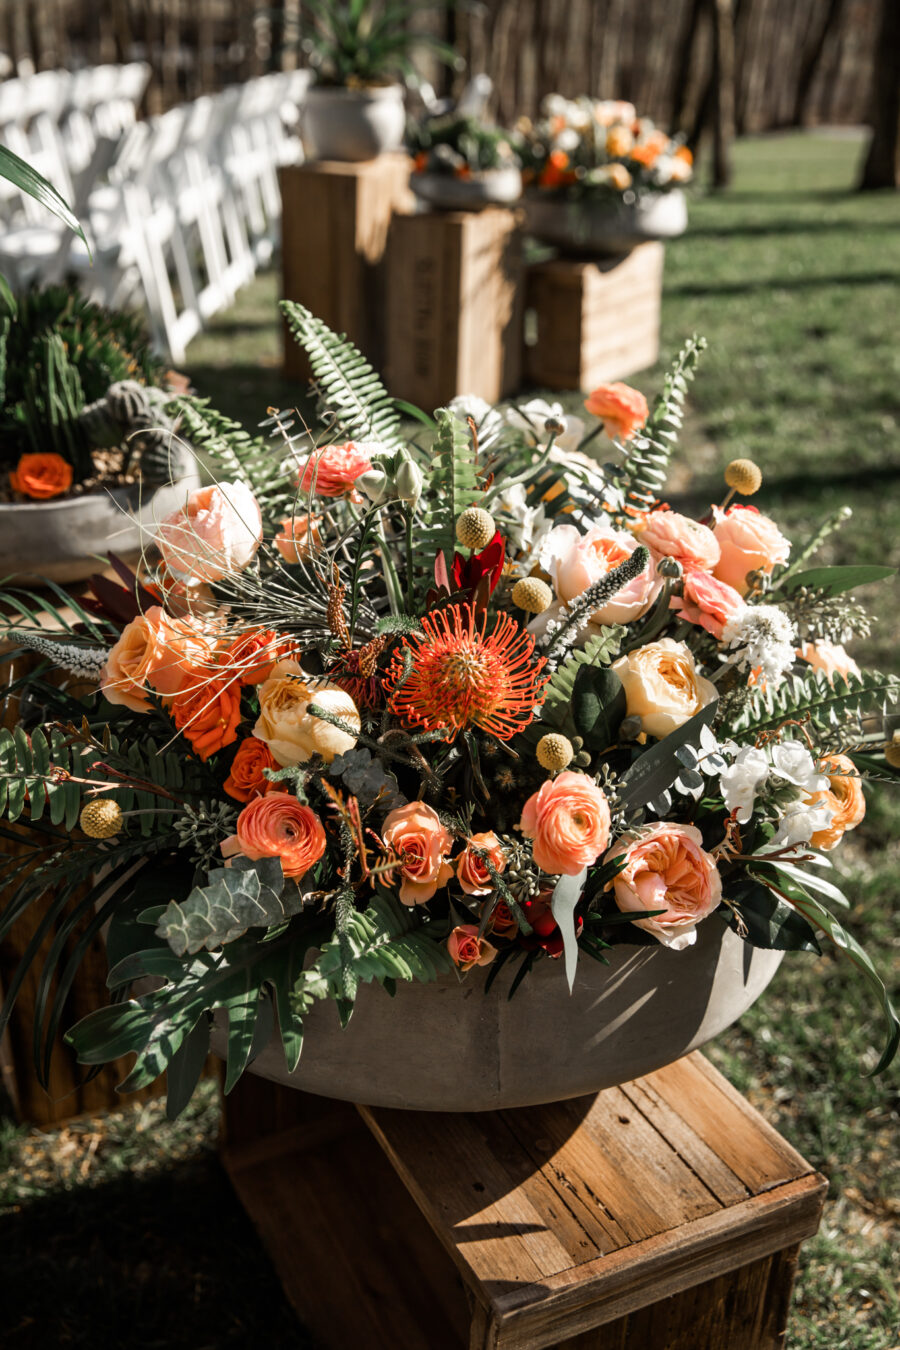 Orange wedding flowers: Western Inspired Wedding by Laurie D'Anne Events featured on Nashville Bride Guide